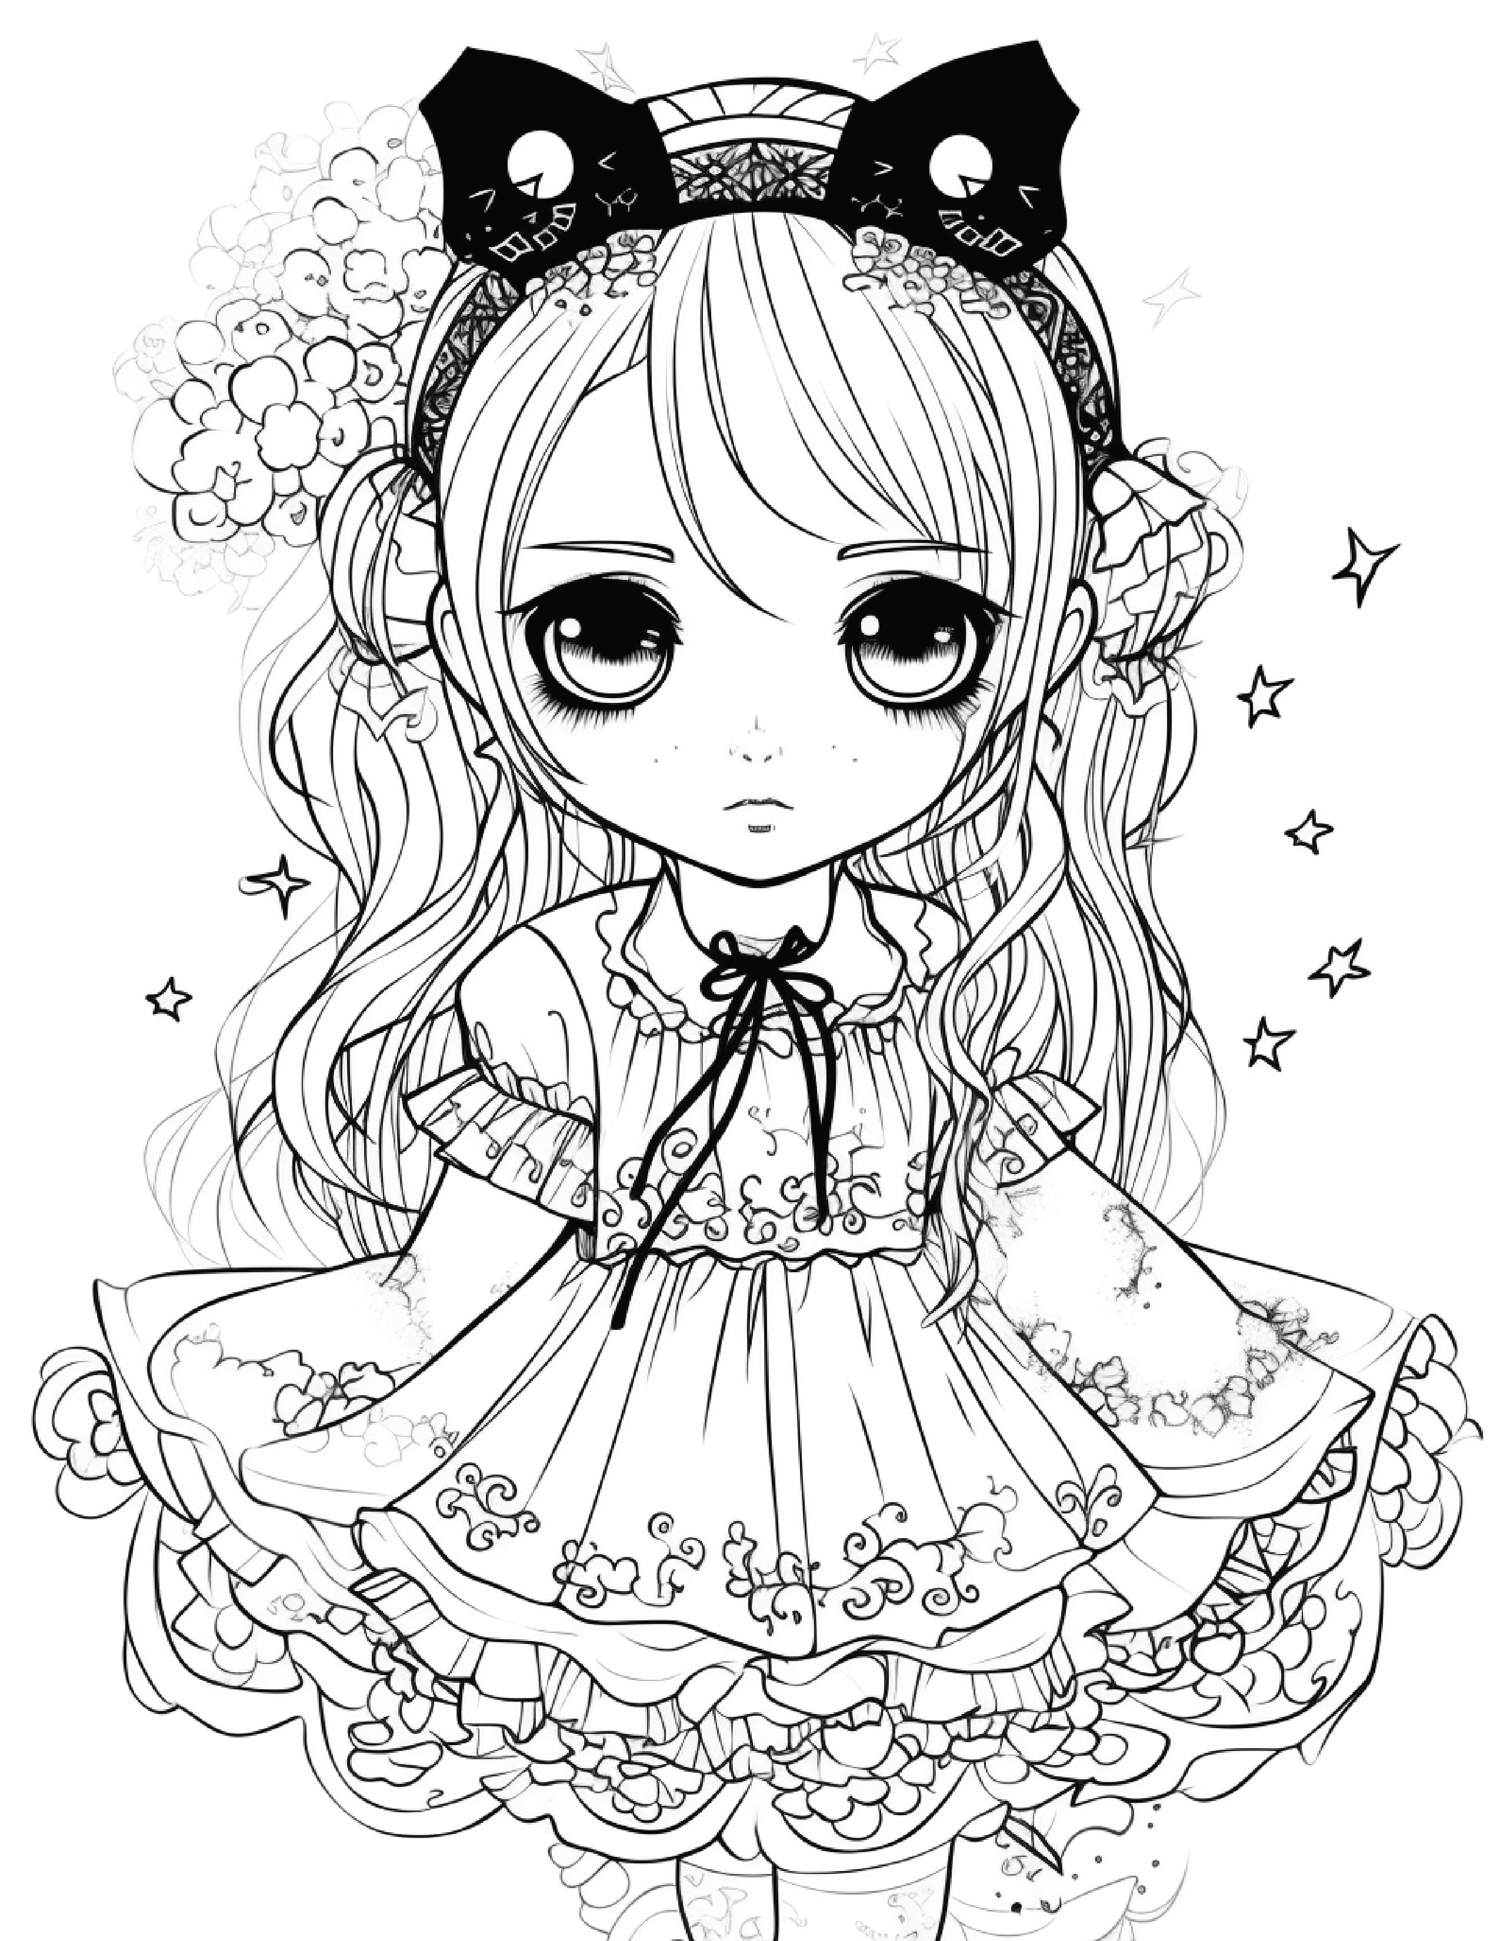 Creepy cute kawaii coloring pages for kids printable coloring pages for kids